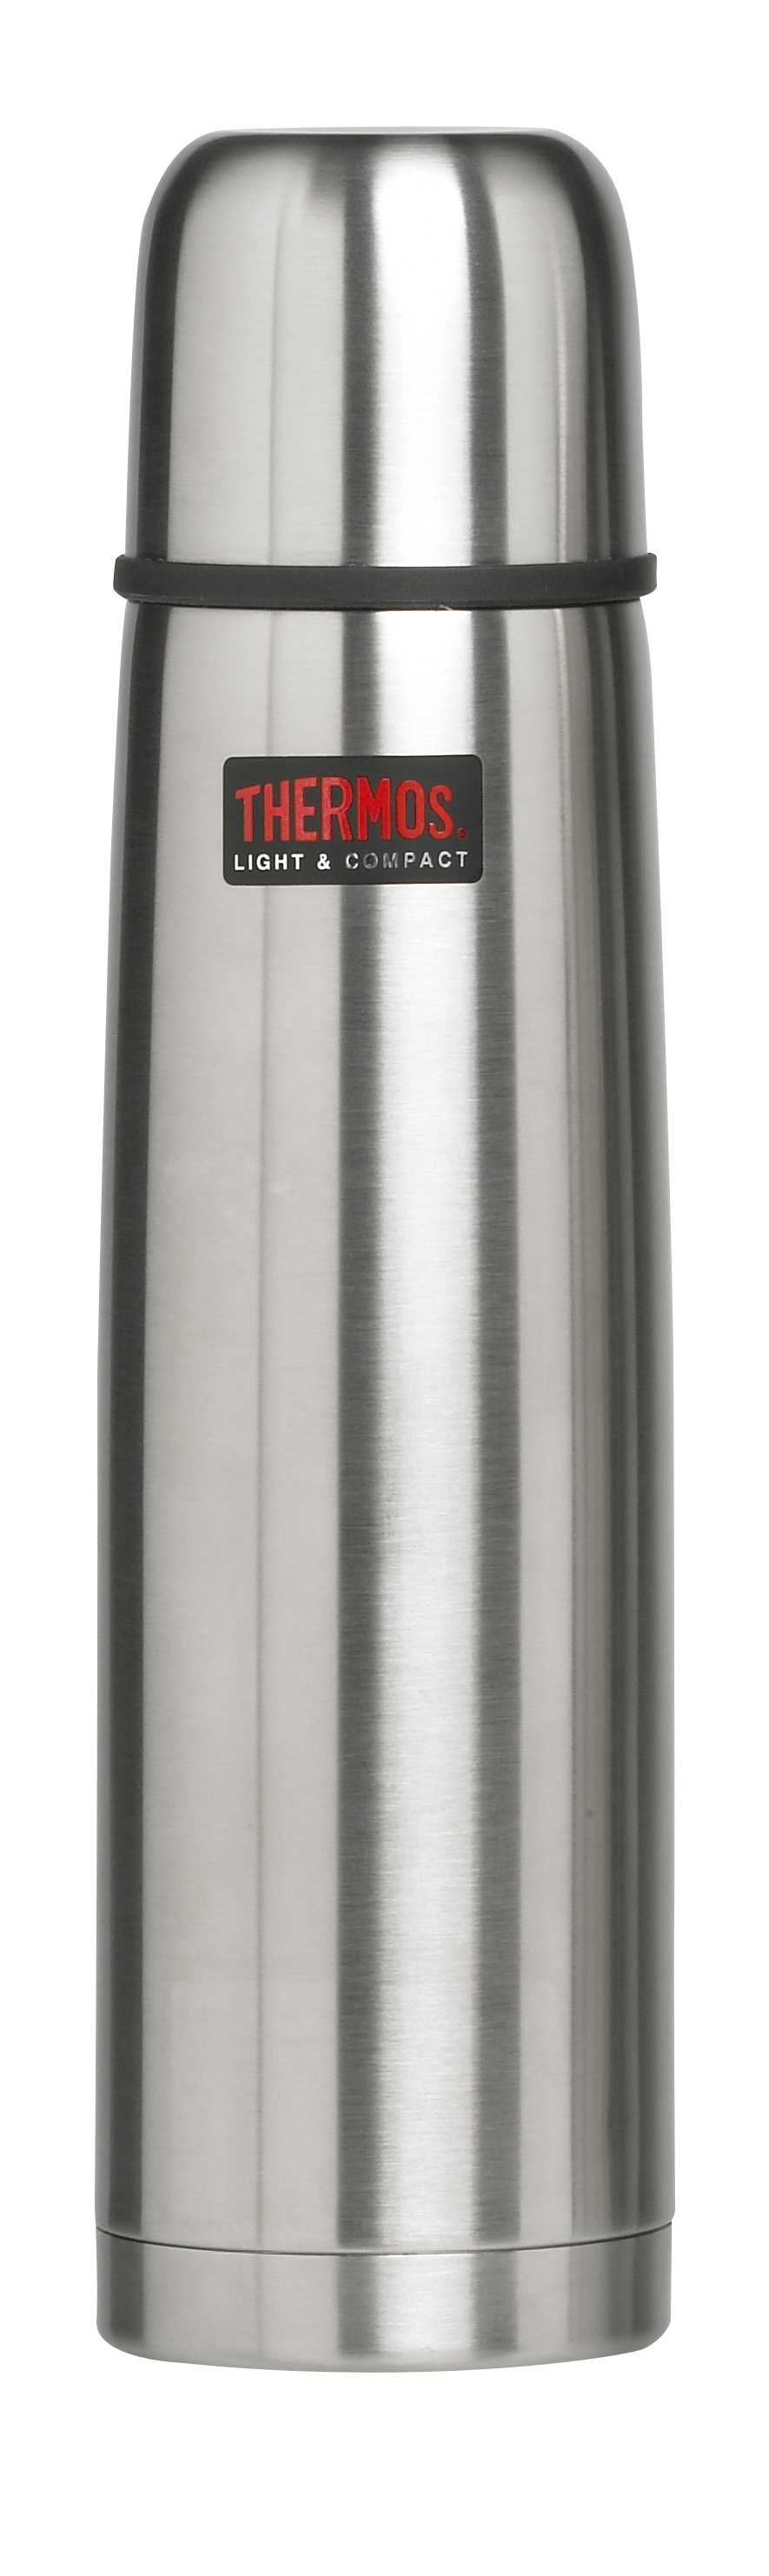 Thermos Thermosflasche Light & Compact 1 L, Edelstahl